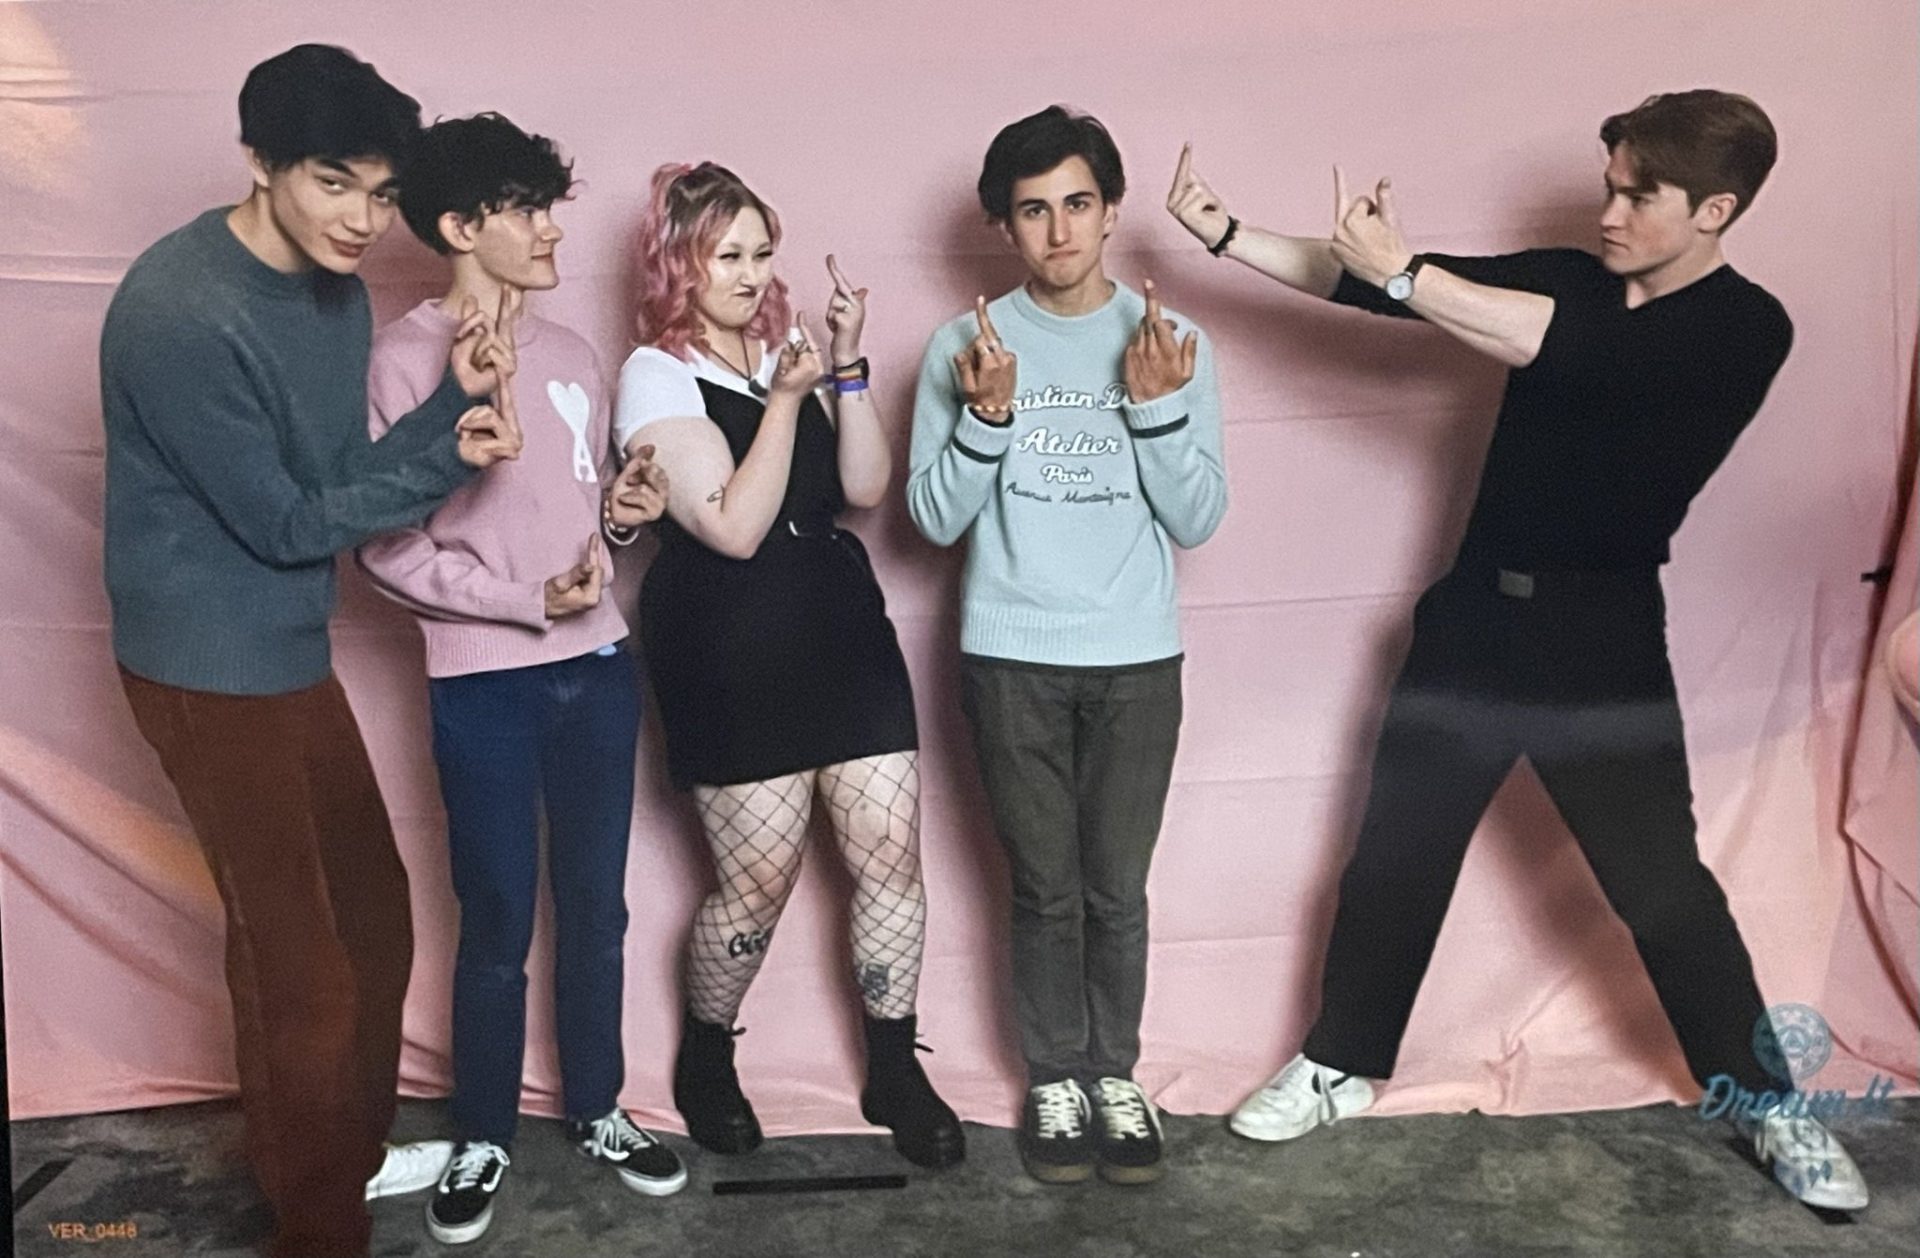 Netflix's “Heartstopper” Cast Poses With Fans & More At The DifLondon Fest